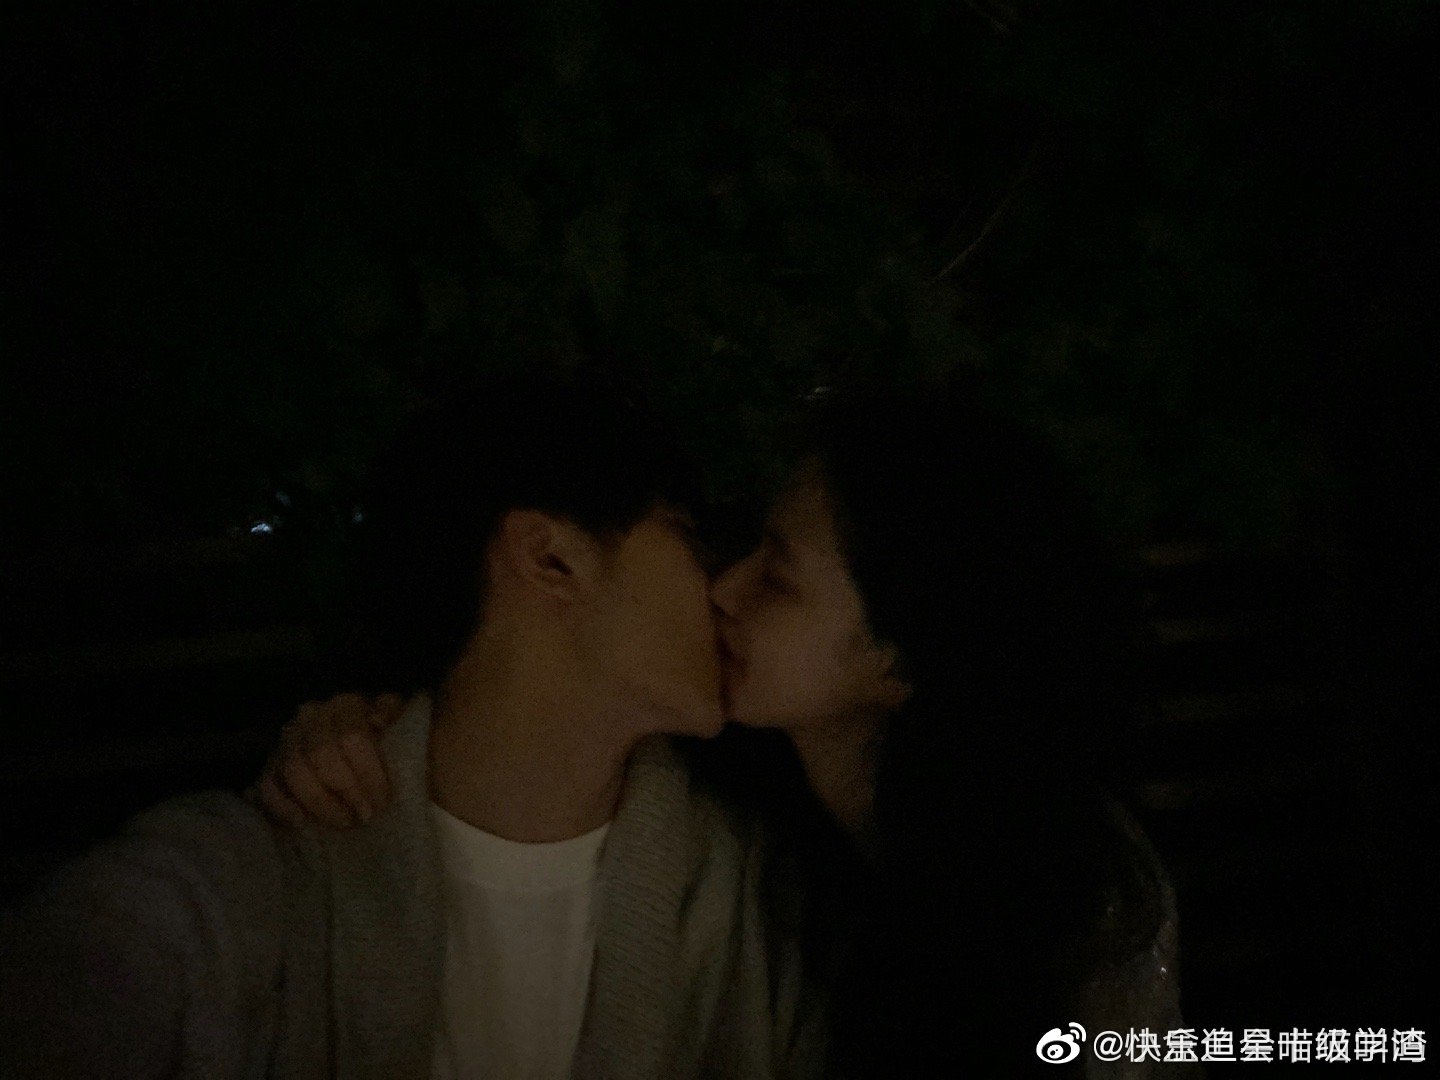 Centkent Ex Girlfriend Of Yan Xujia Of R1se Releases Photos Of The Two Post Saying Goodbye To Him She Reveals He Cheated On Her Ghosted Her And Was Disrespectful To Fellow R1se